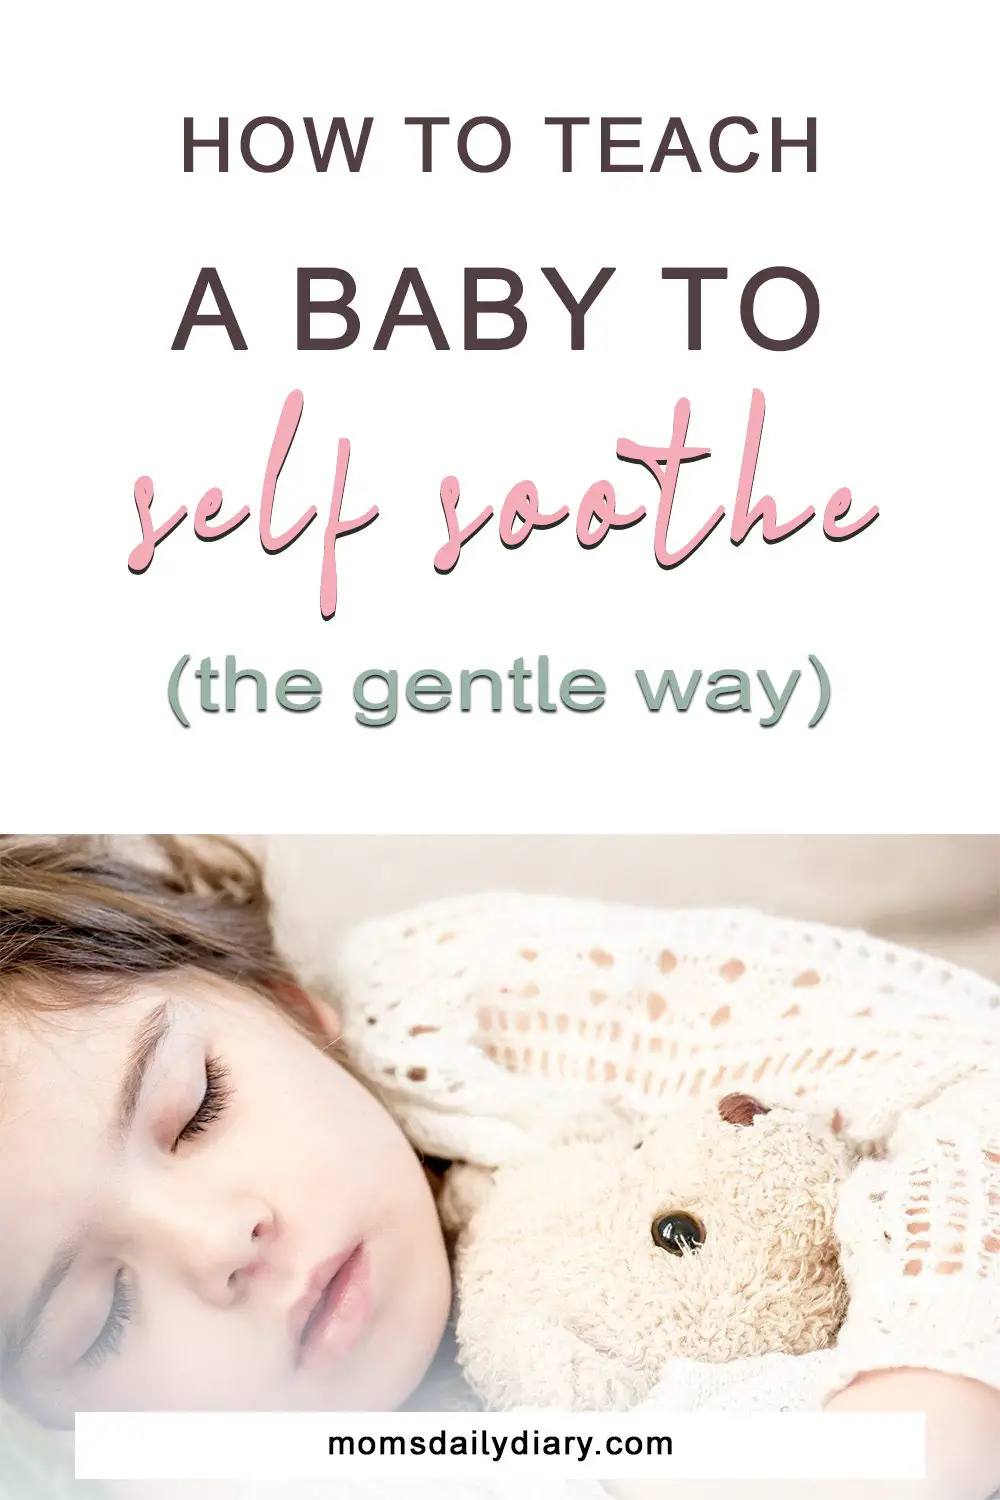 Do you wish your baby was able to sleep through the night, so you could too? It is possible if you know how to teach a baby to self soothe.